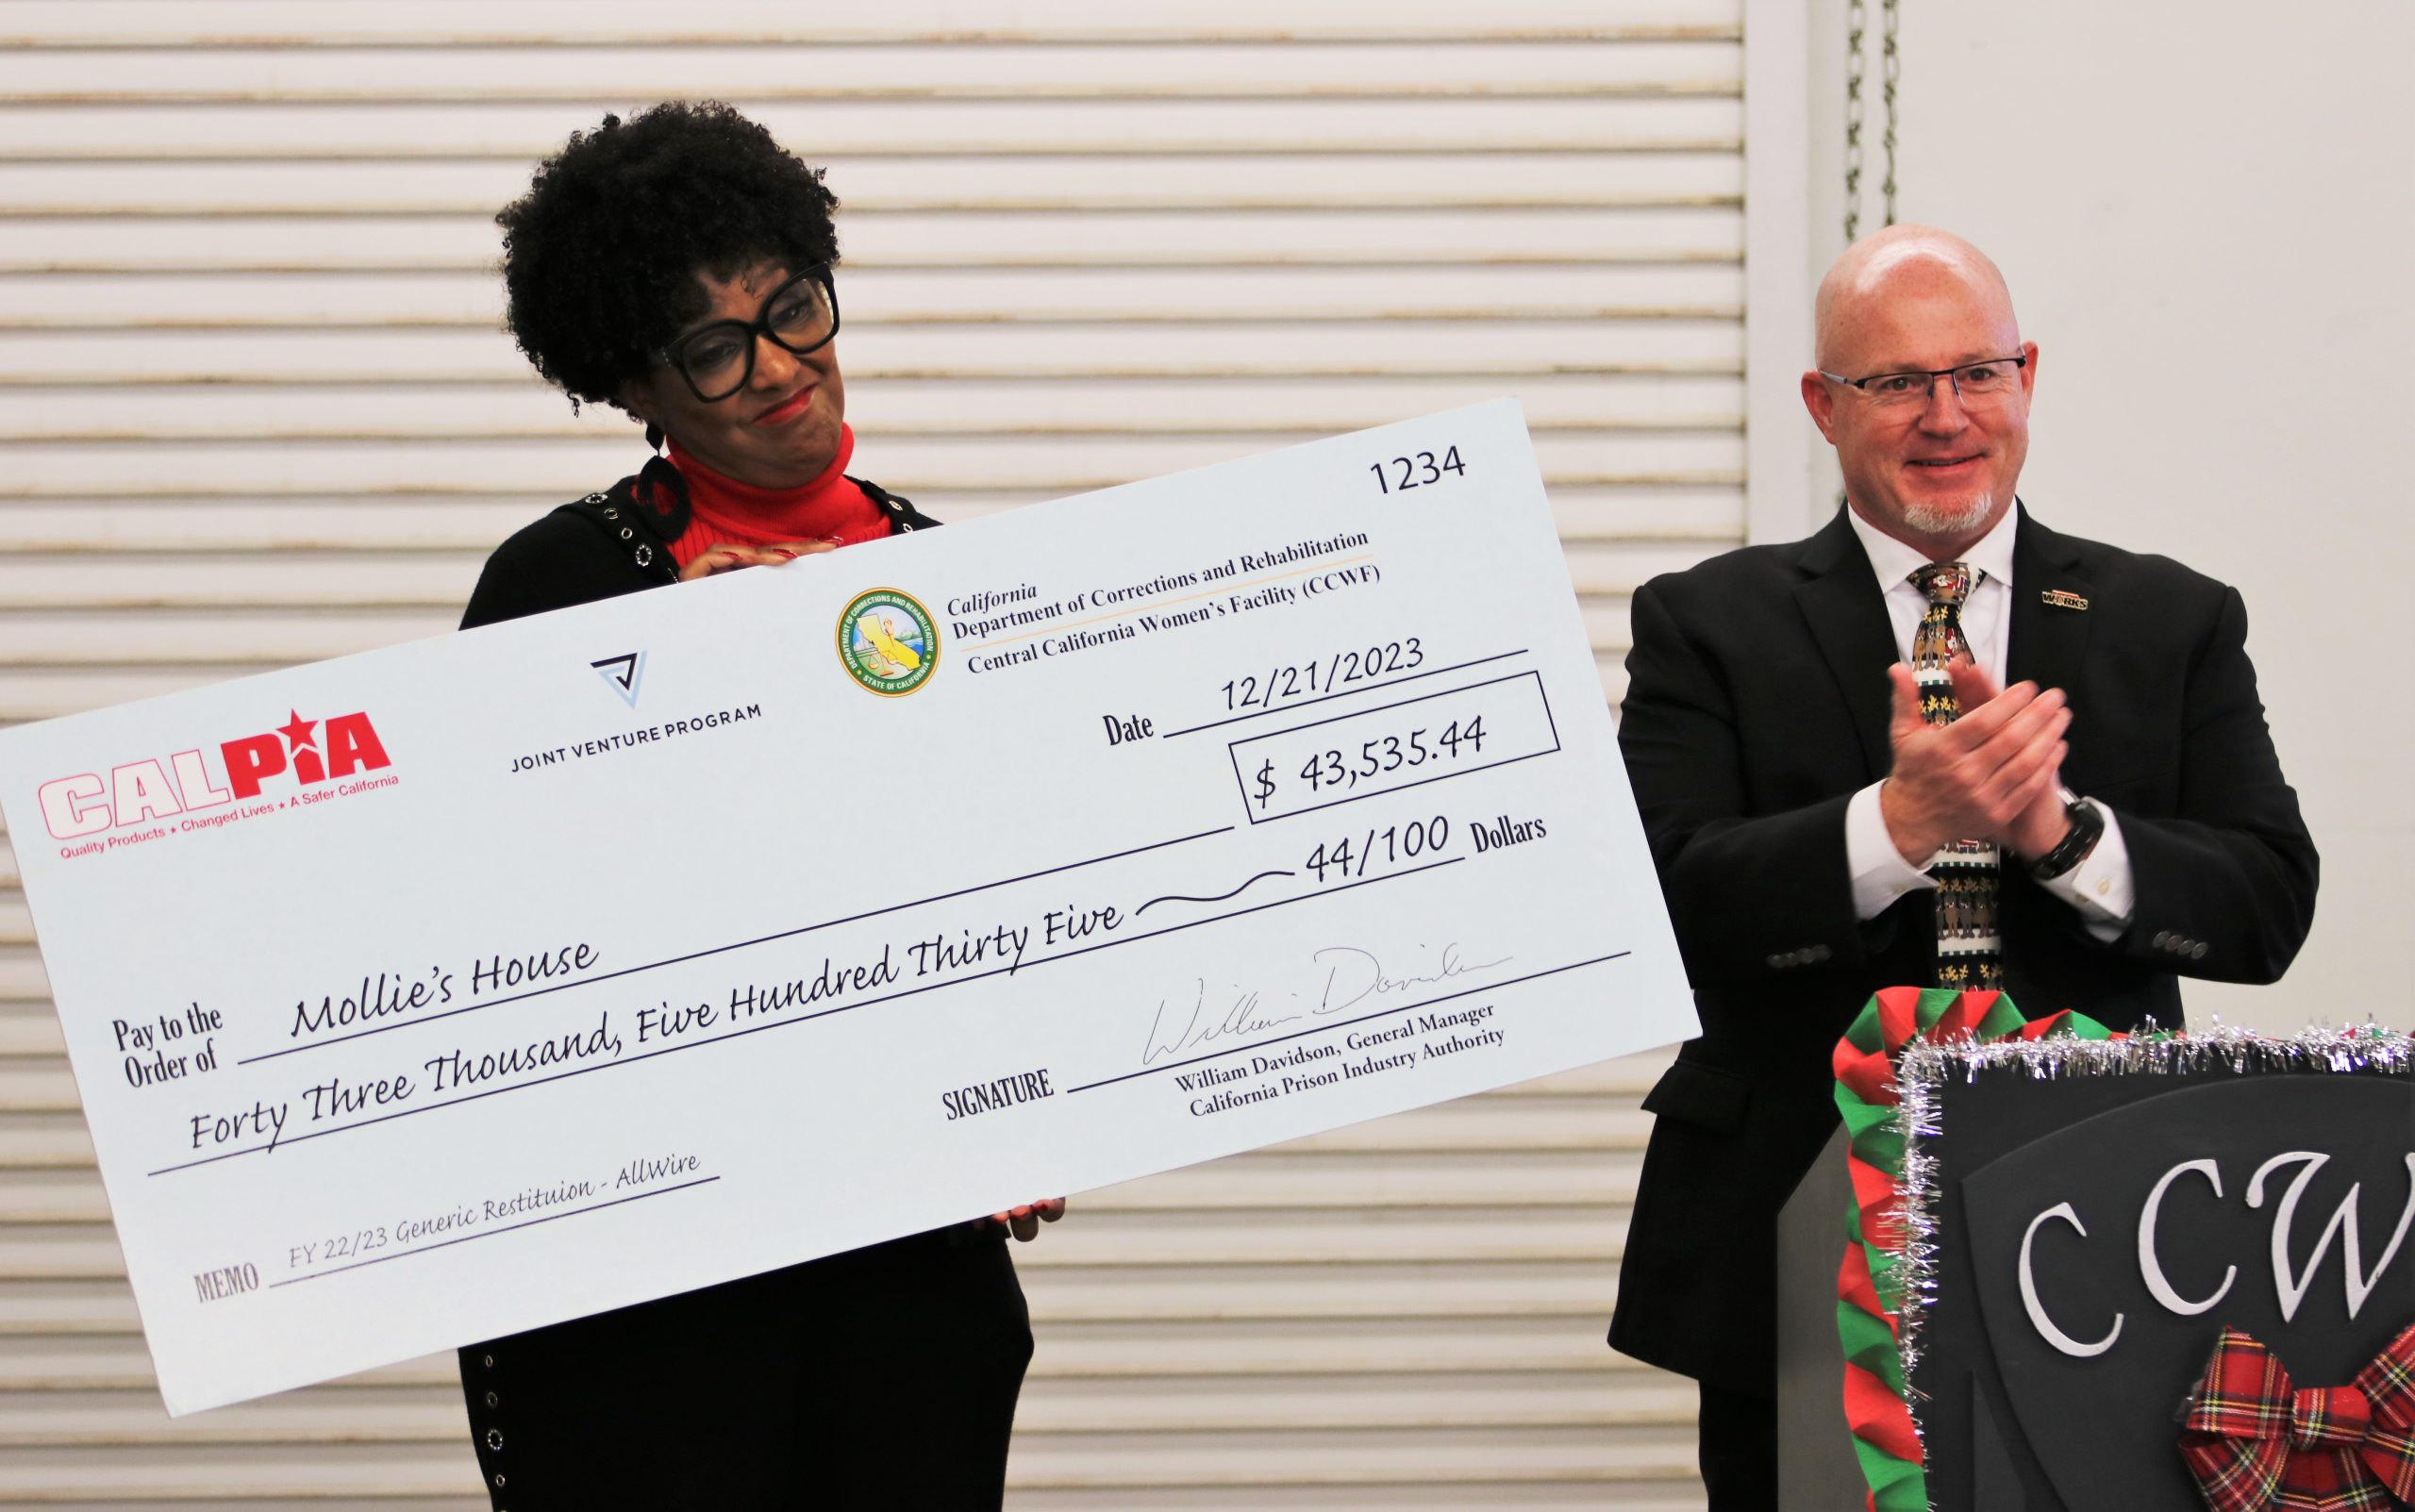 A woman holds an over-sized donation check presented by CALPIA as another person applauds.